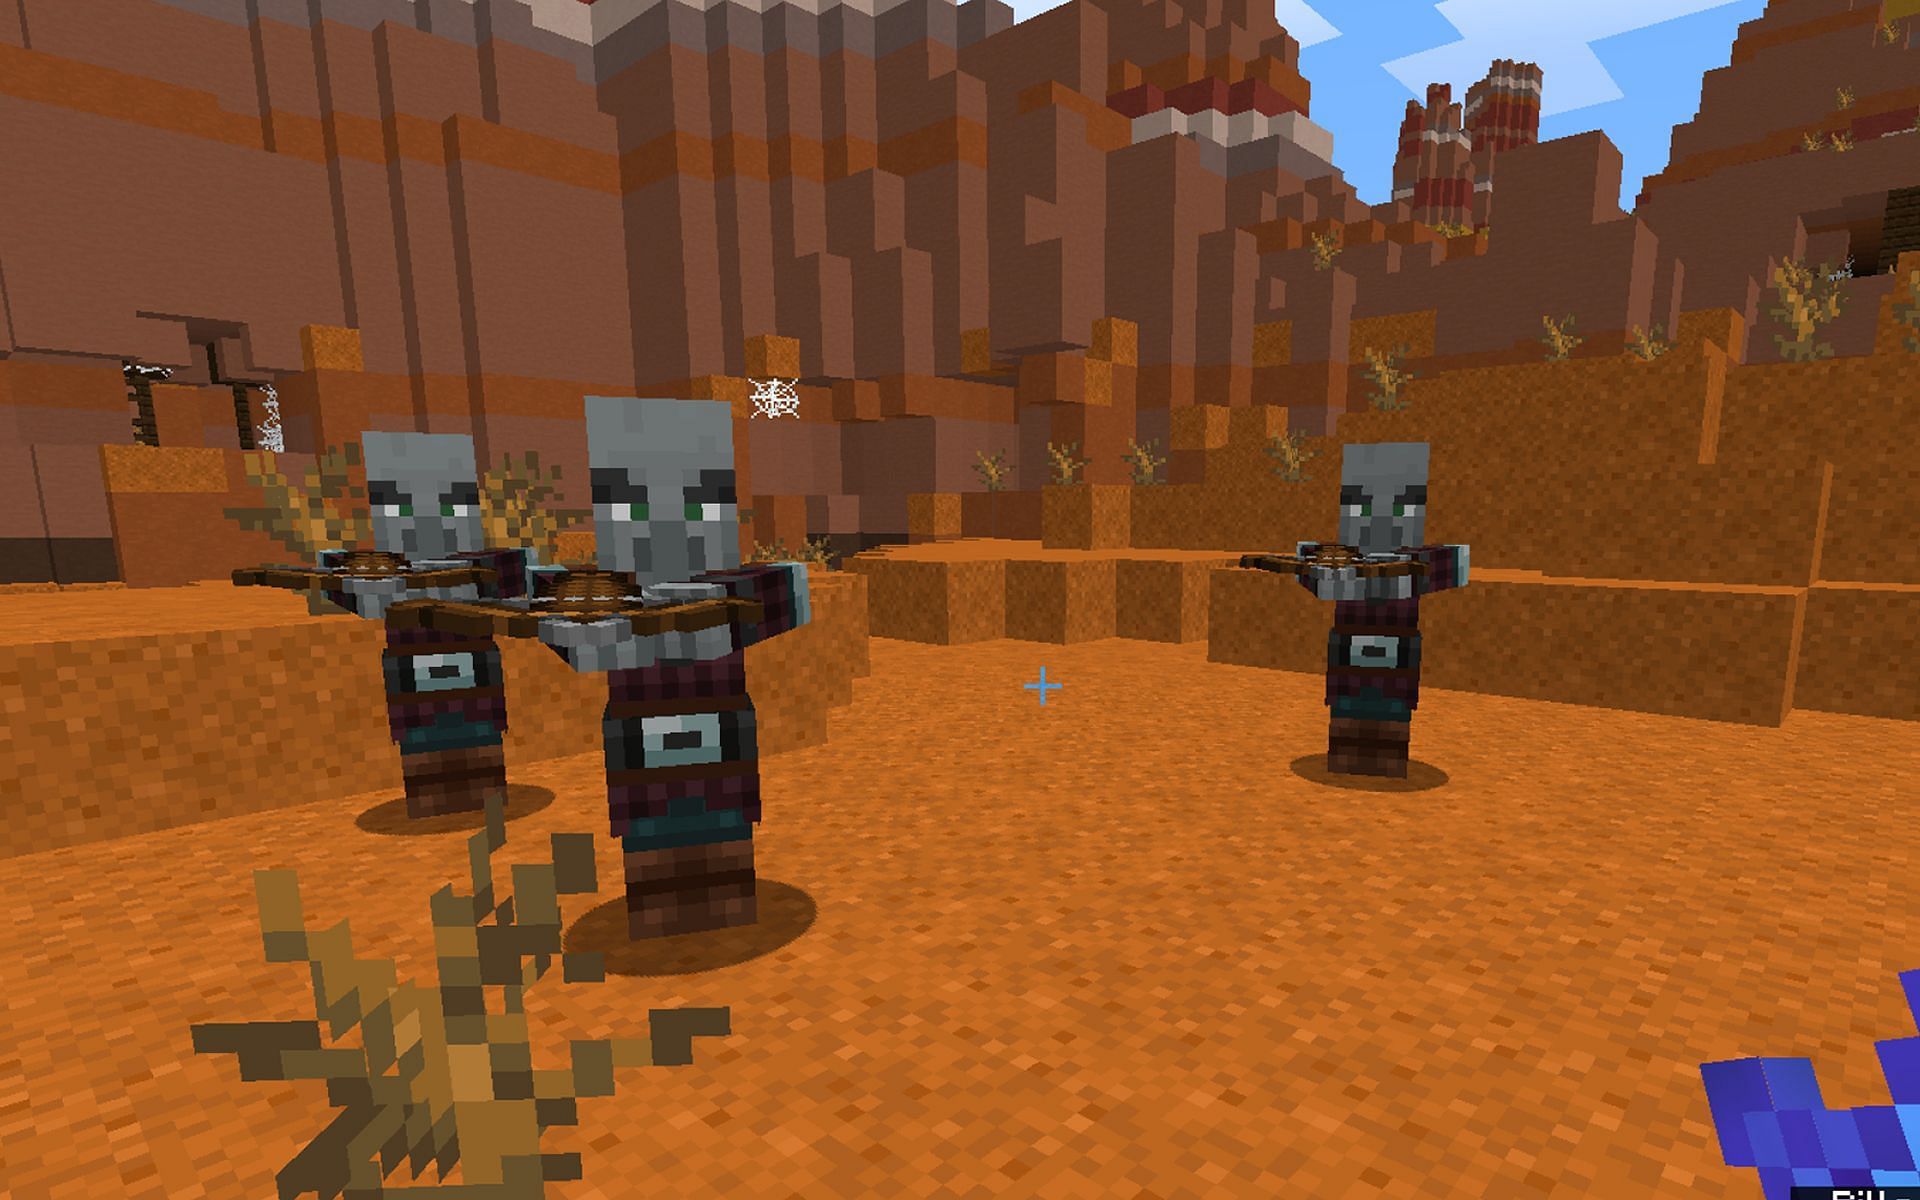 Pillagers are often armed with crossbows. Image via Minecraft.